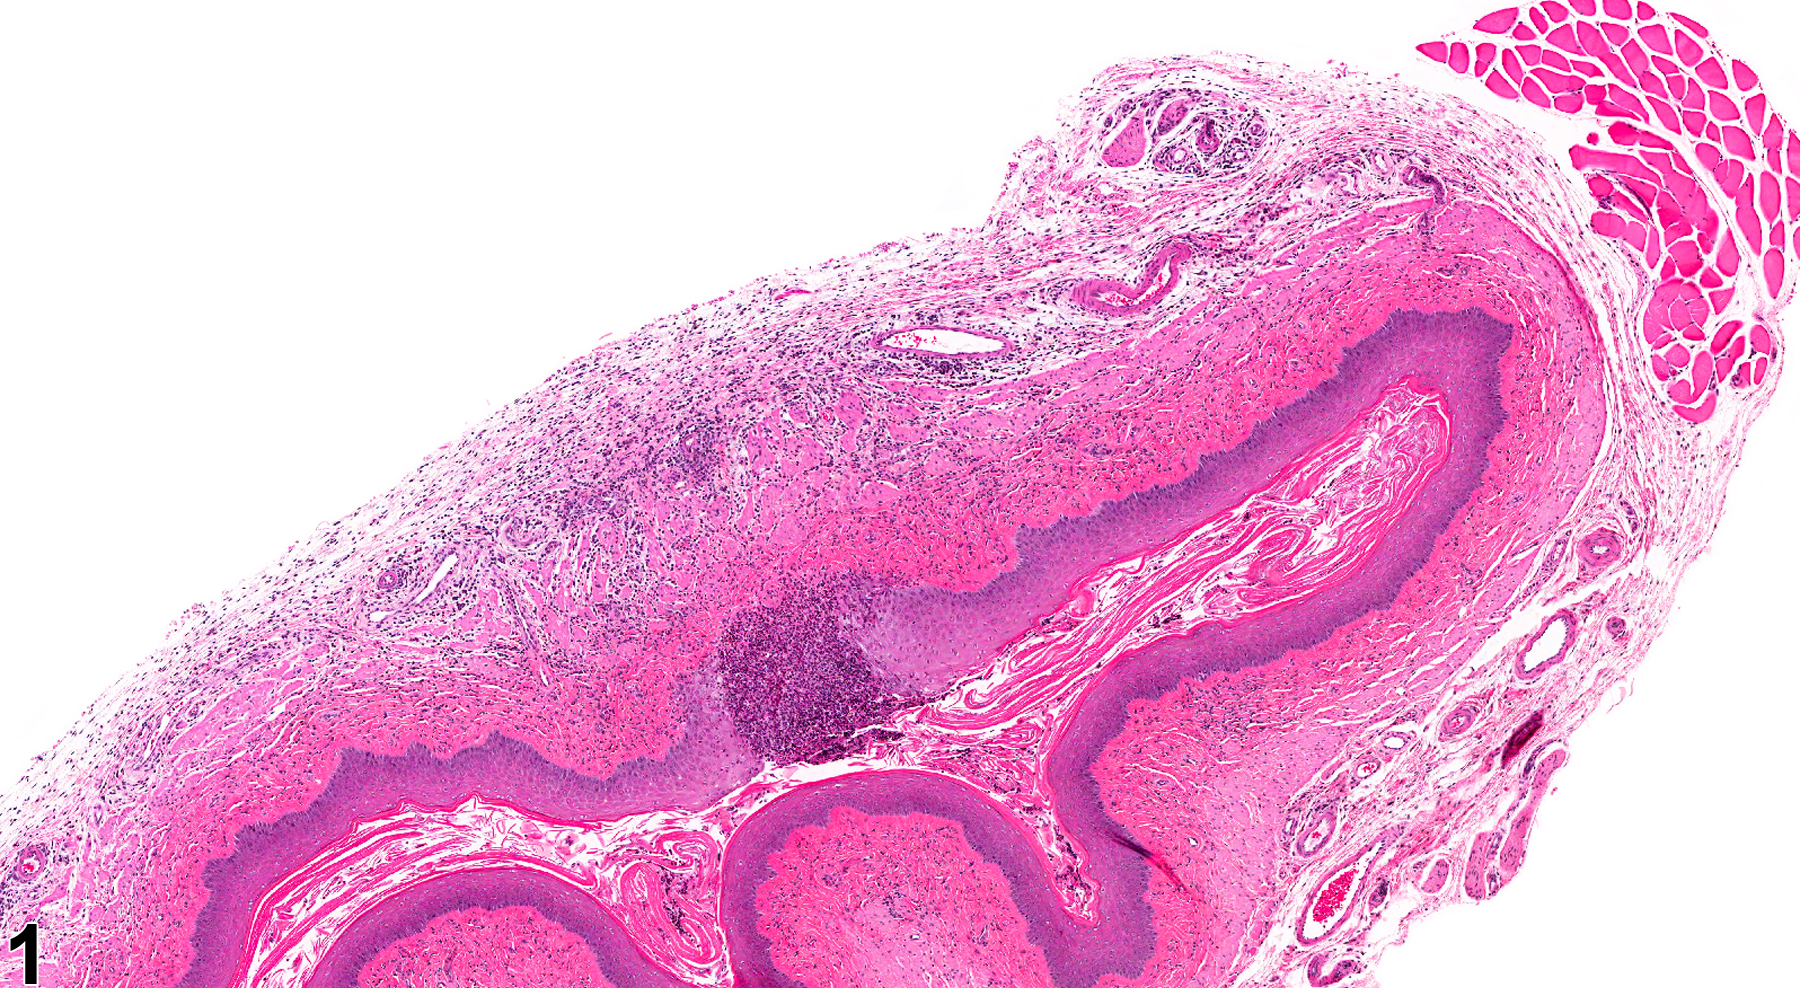 Image of ulcer in the vagina from a female Harlan Sprague-Dawley rat in a chronic study